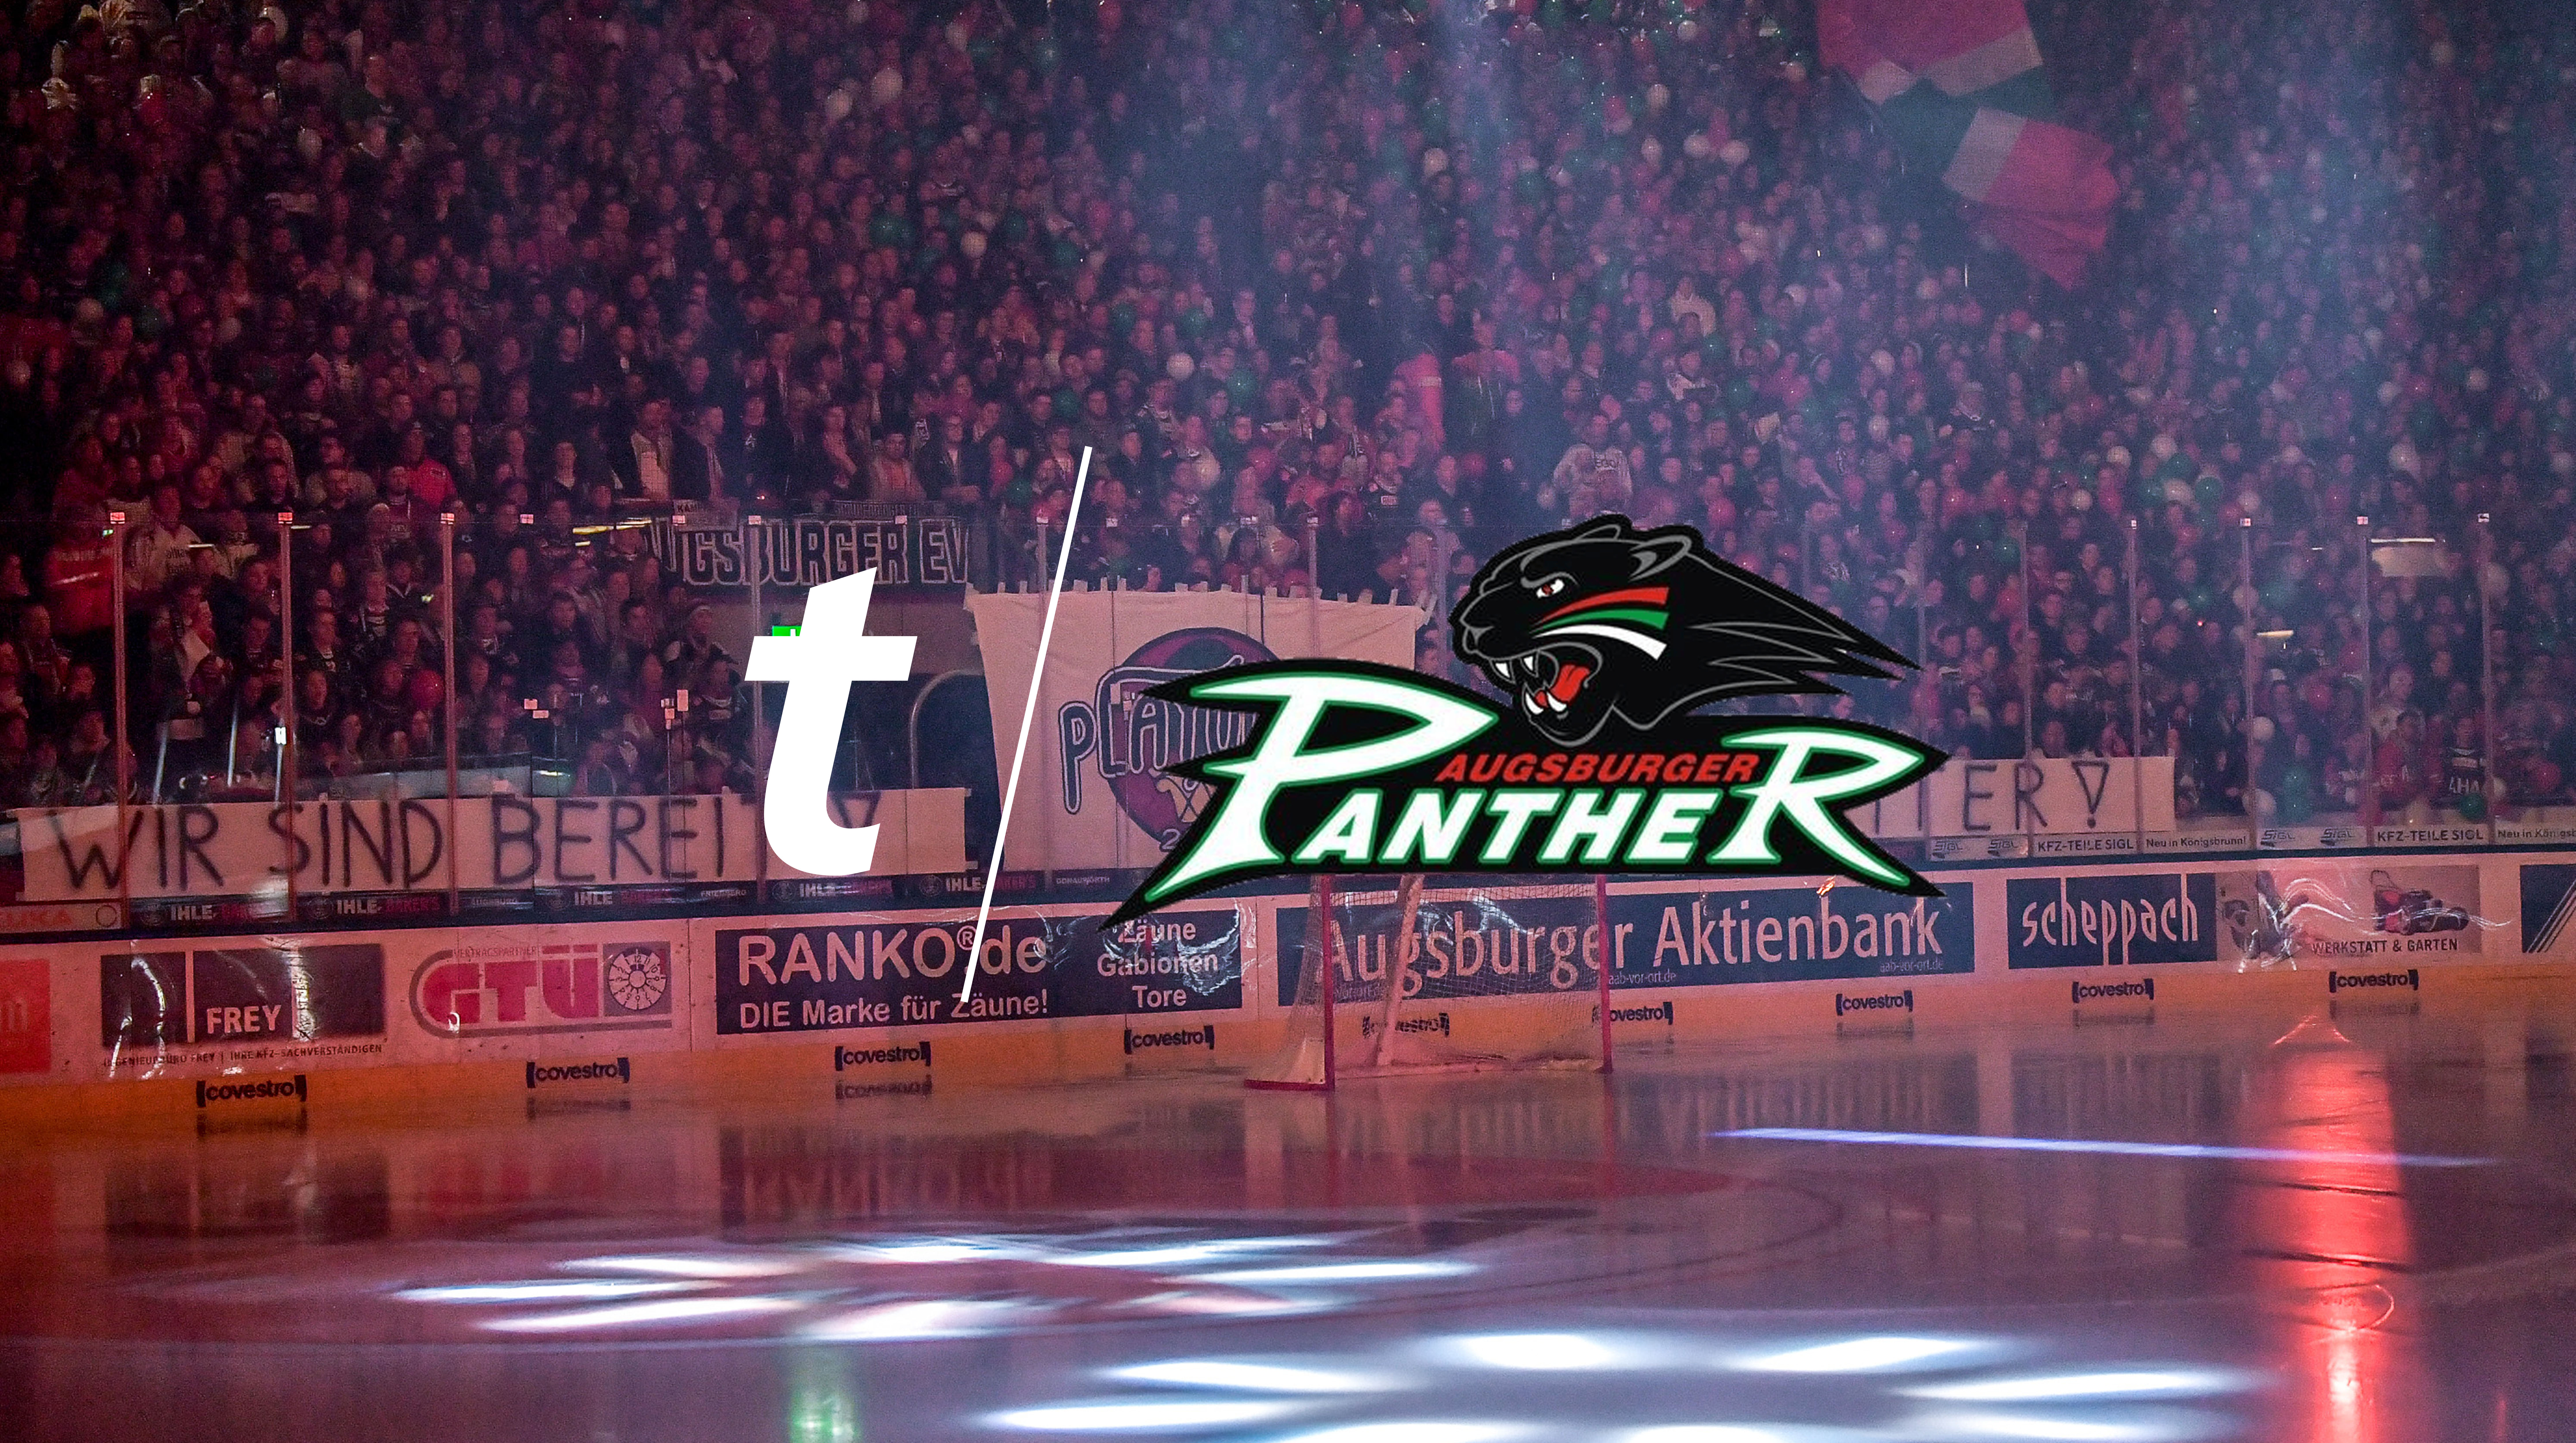 Augsburger Panther confirm partnership extension with Ticketmaster Germany